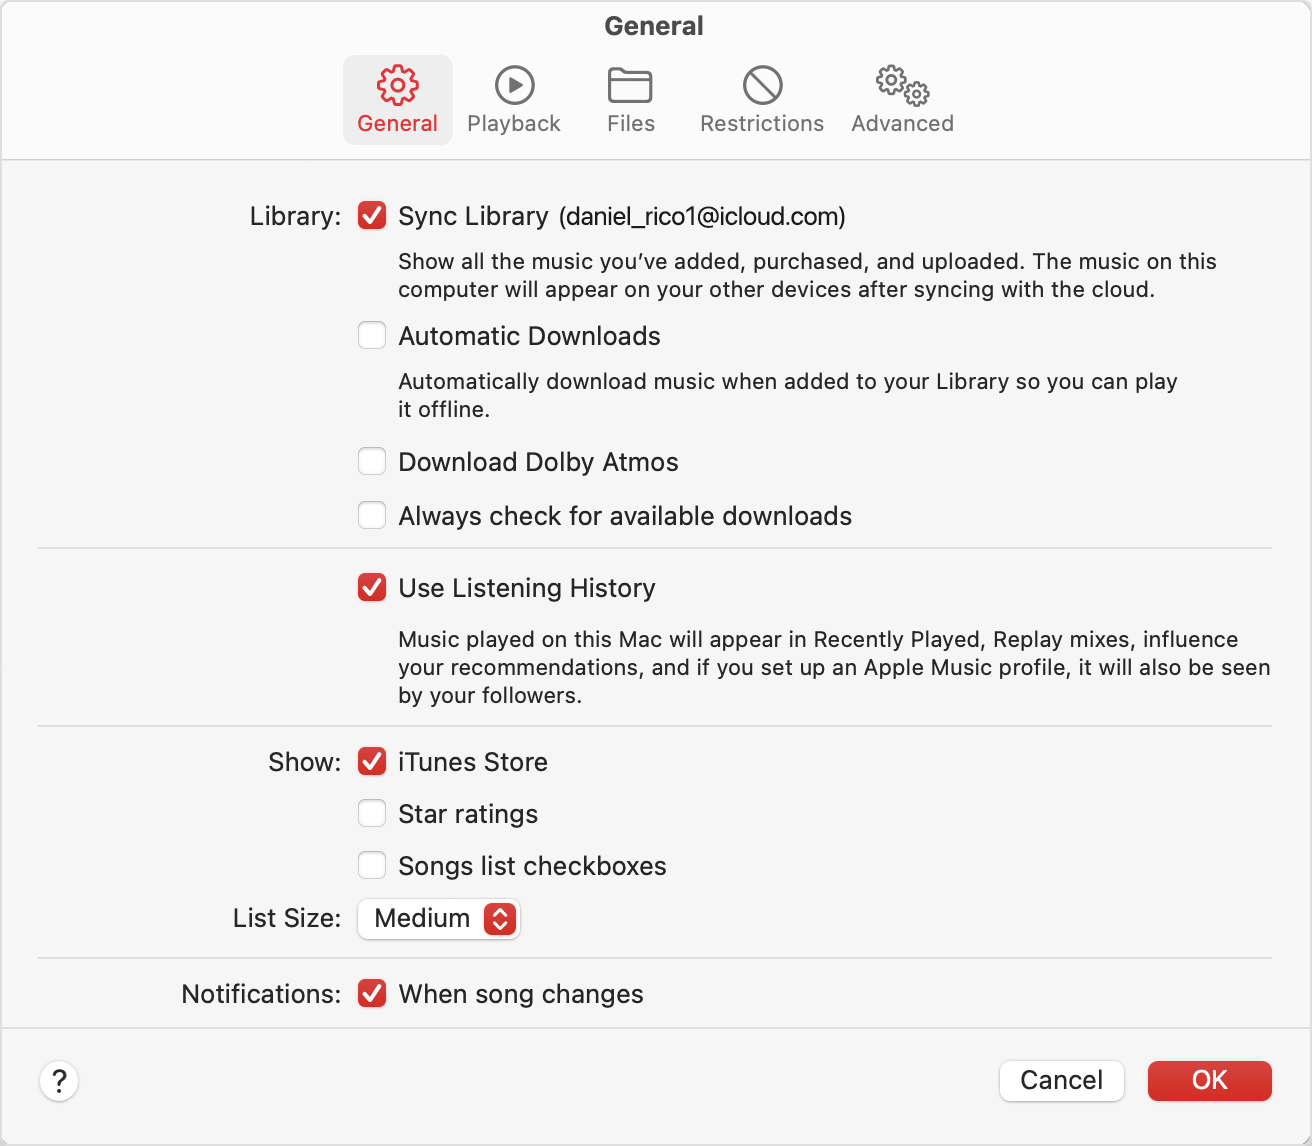 Apple Music app settings window showing the iTunes Store selected